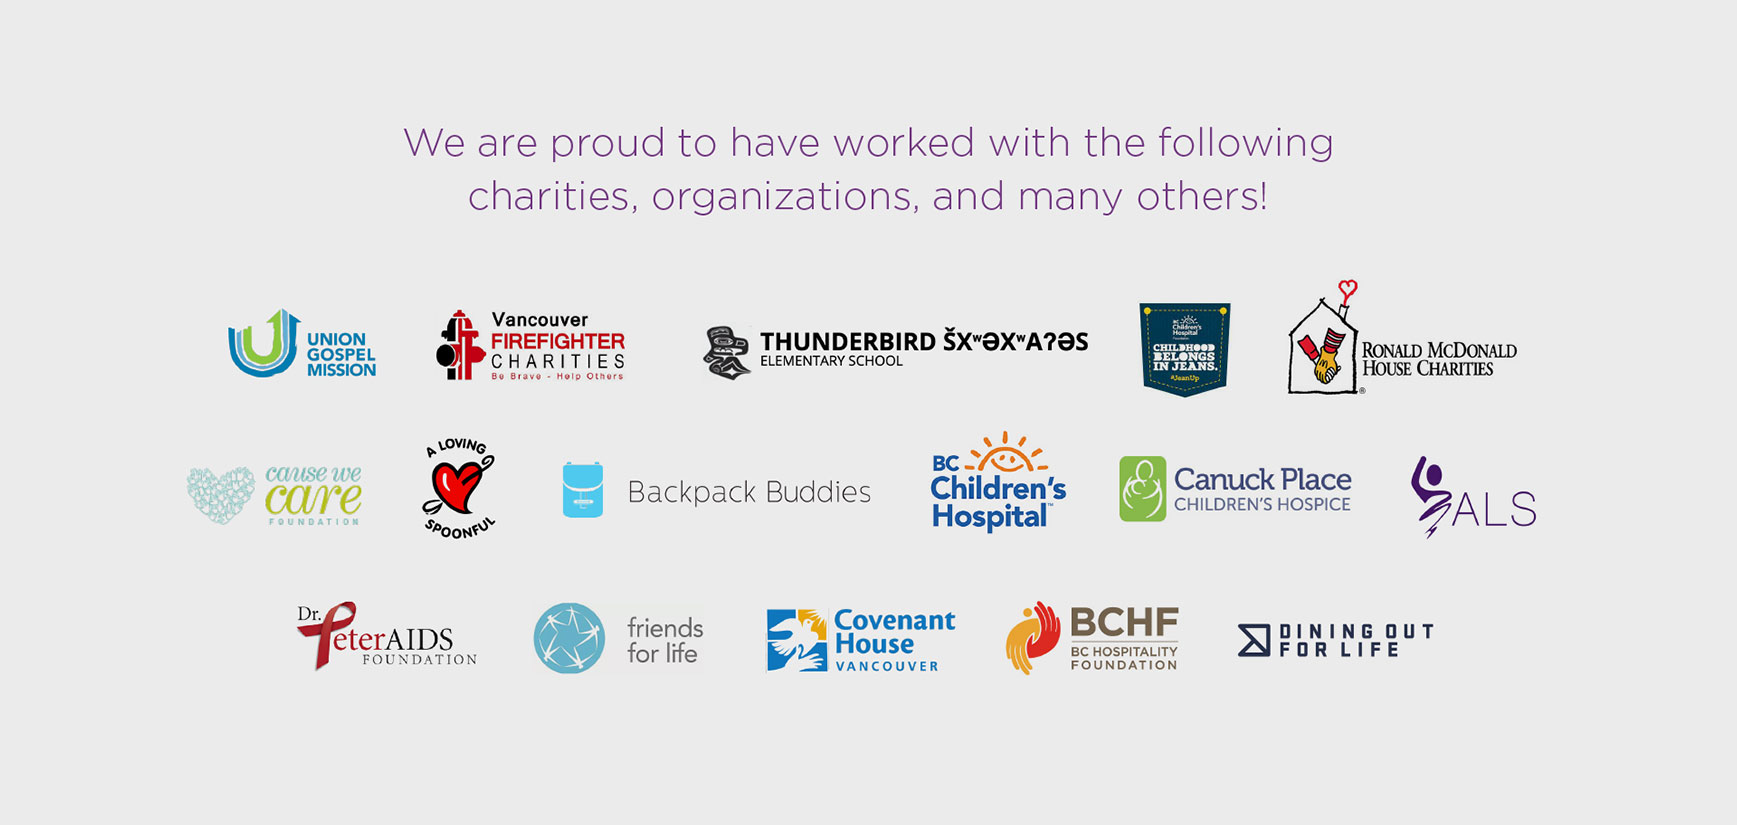 We are proud to have worked with the following charities, organizations, and many others!